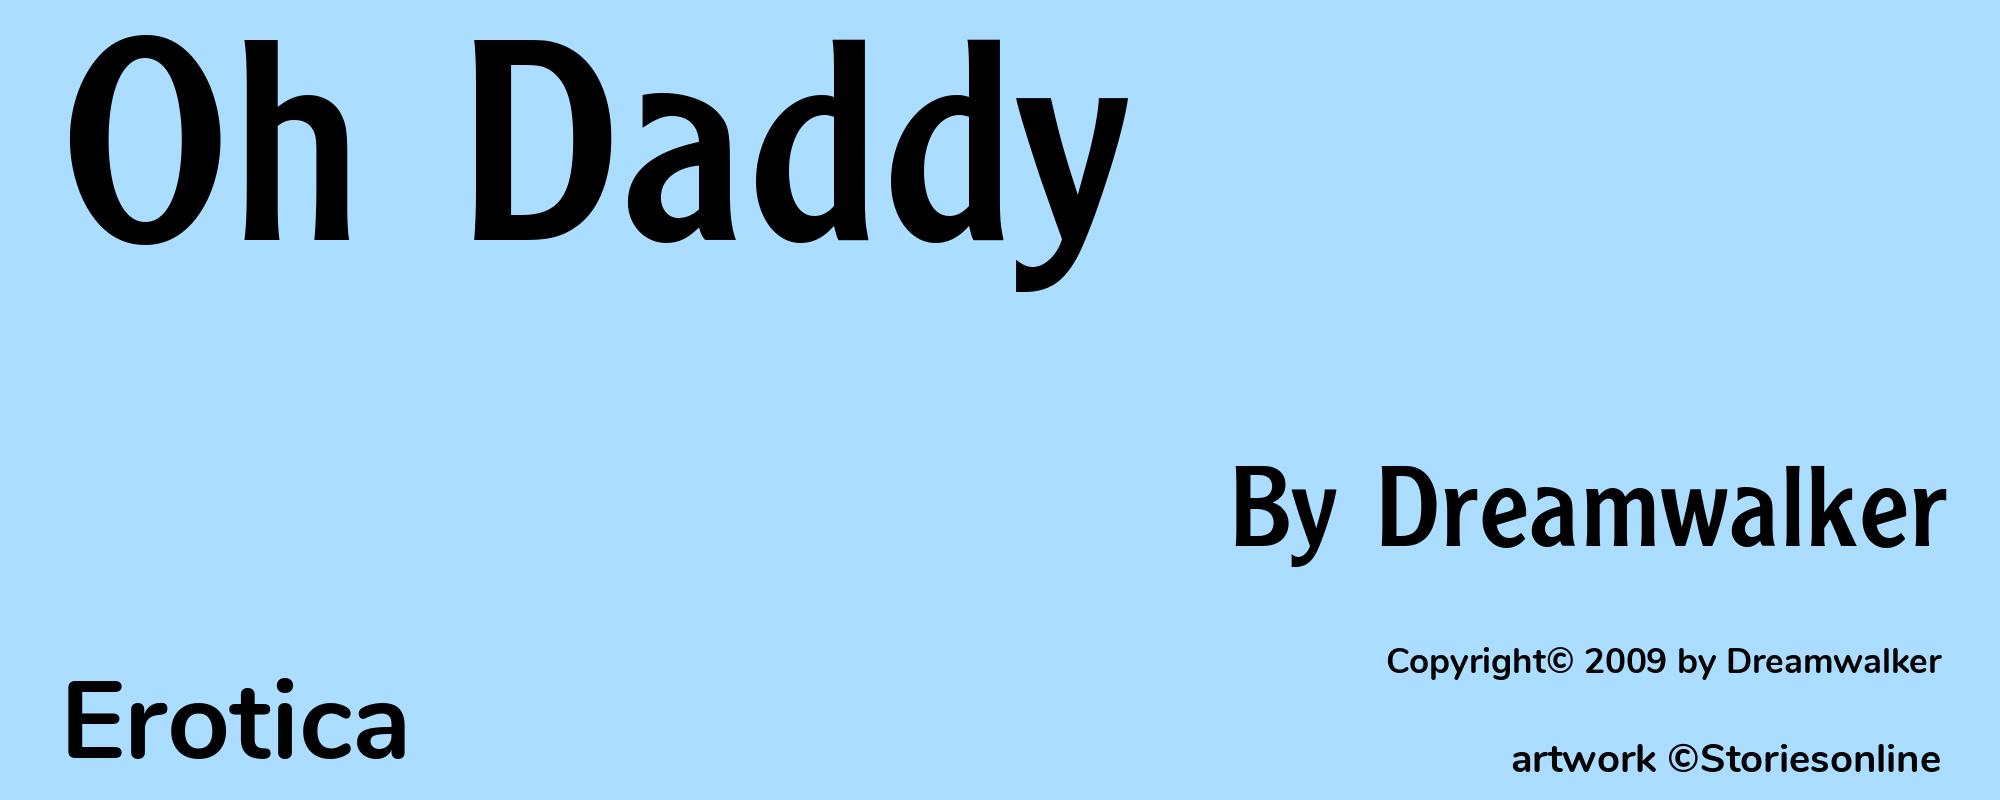 Oh Daddy - Cover